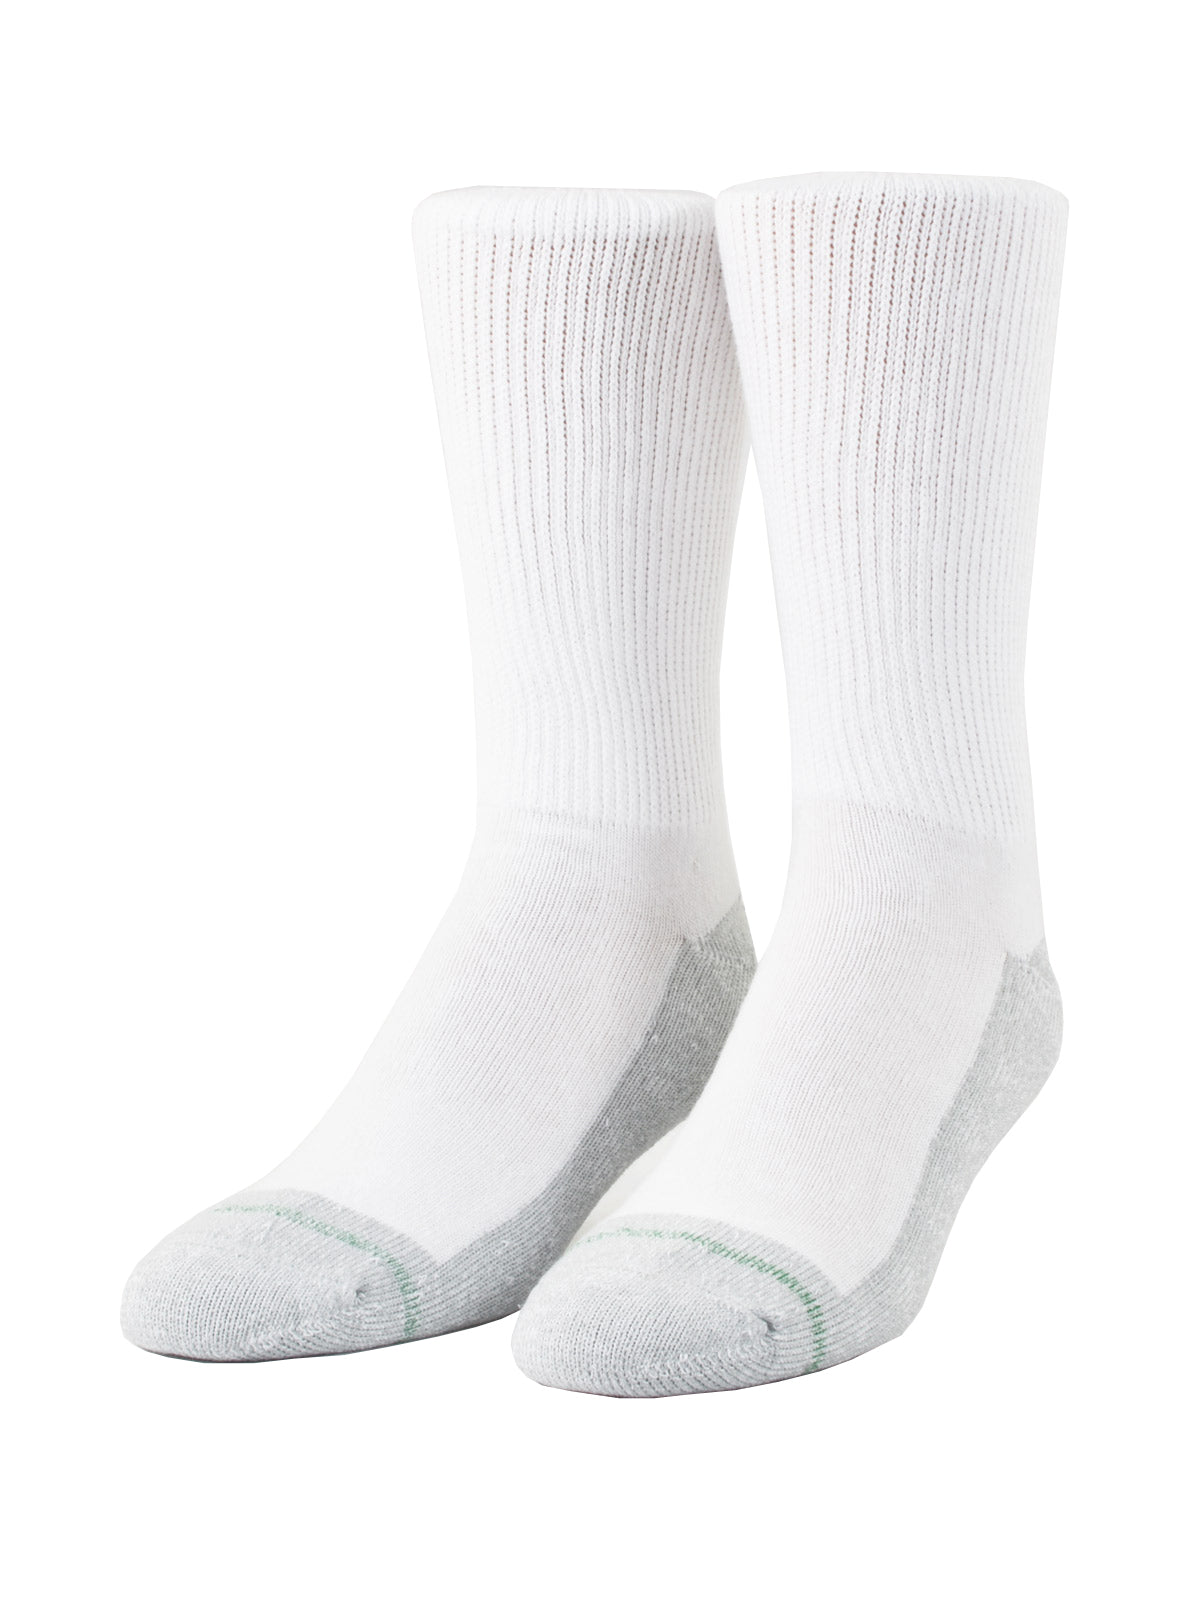 Loose Fit Stays Up Over the Calf Sock - White / Small in 2023